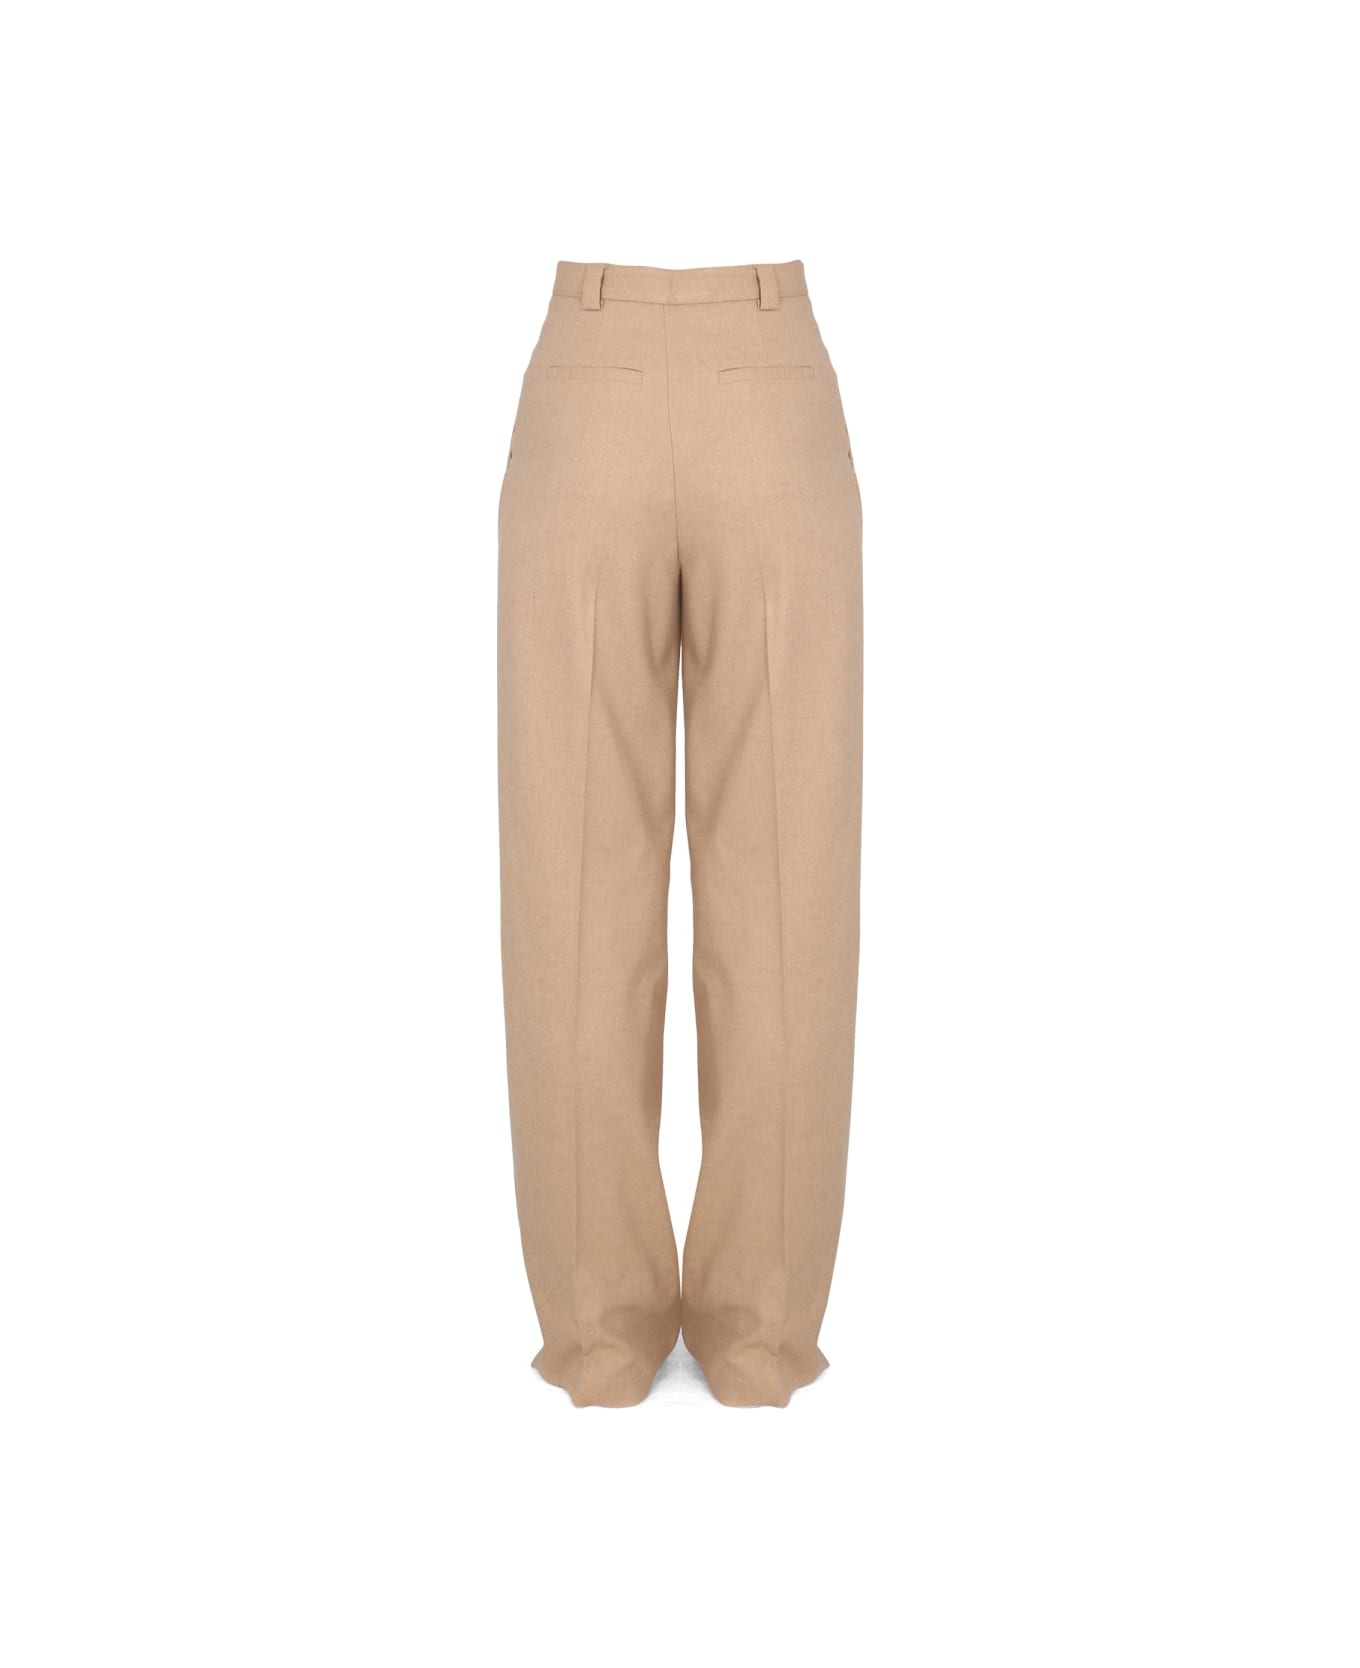 RED Valentino Flared Pants - BEIGE ボトムス